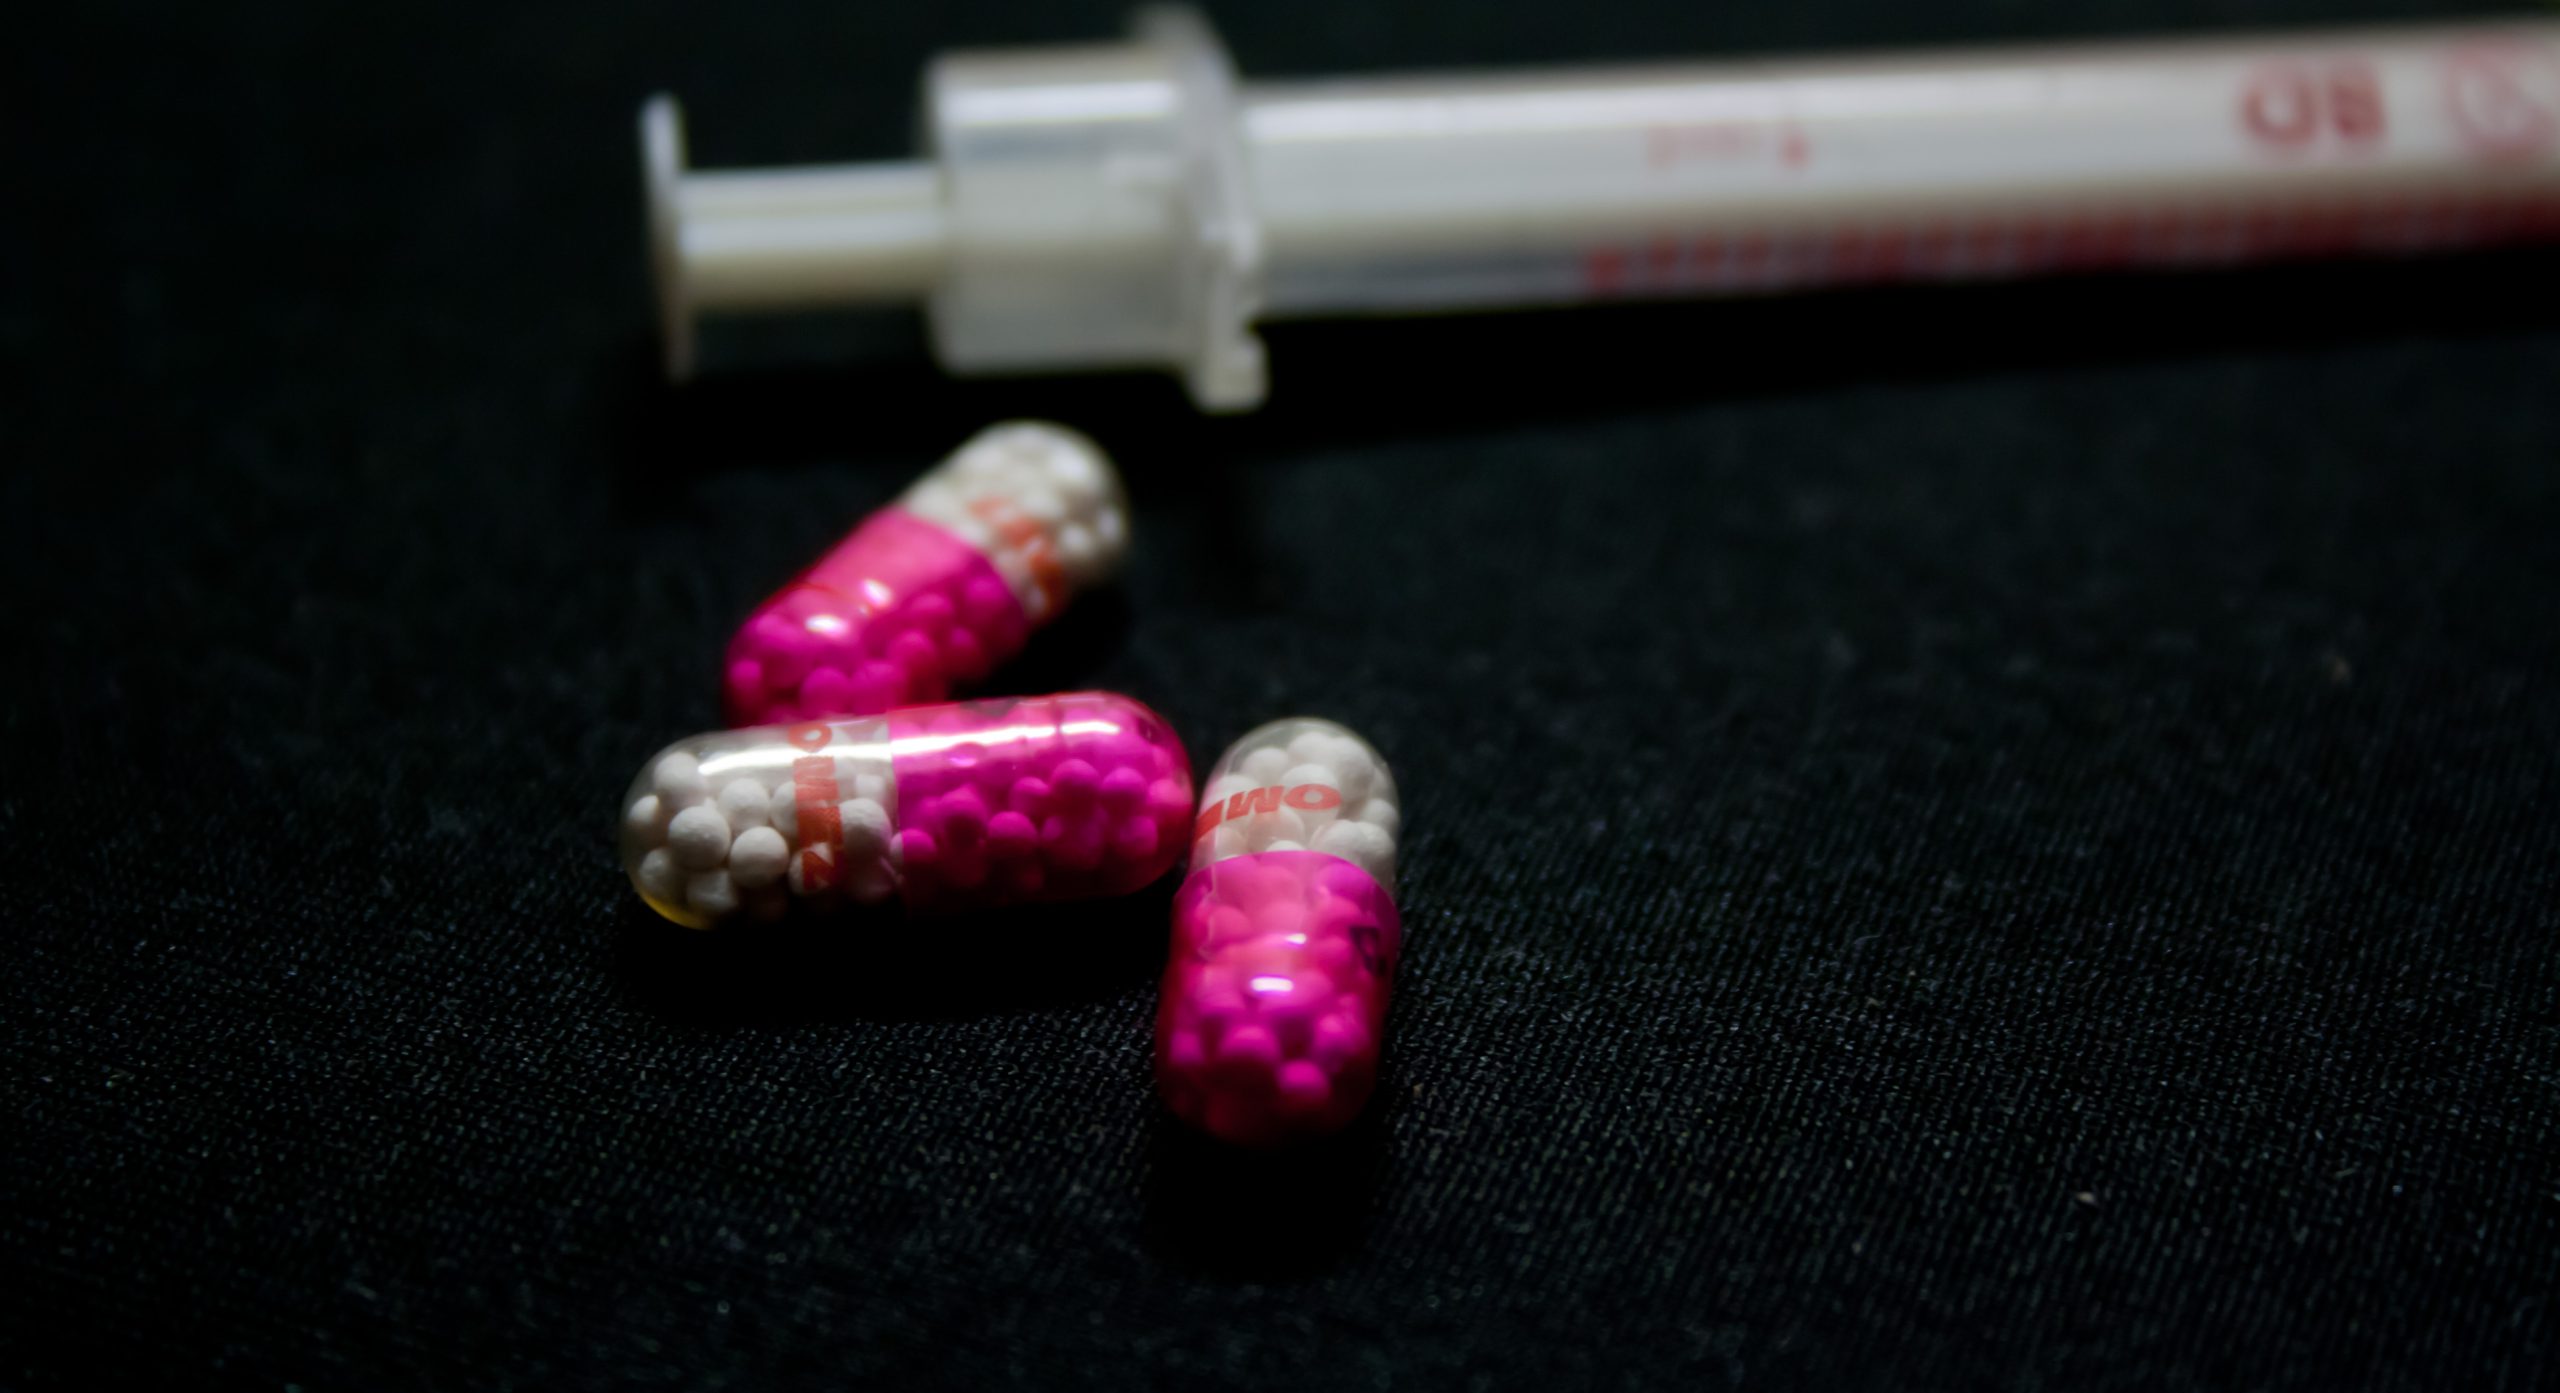 Close up of bright pink and white capsules, out-of-focus needle in background on a black surface